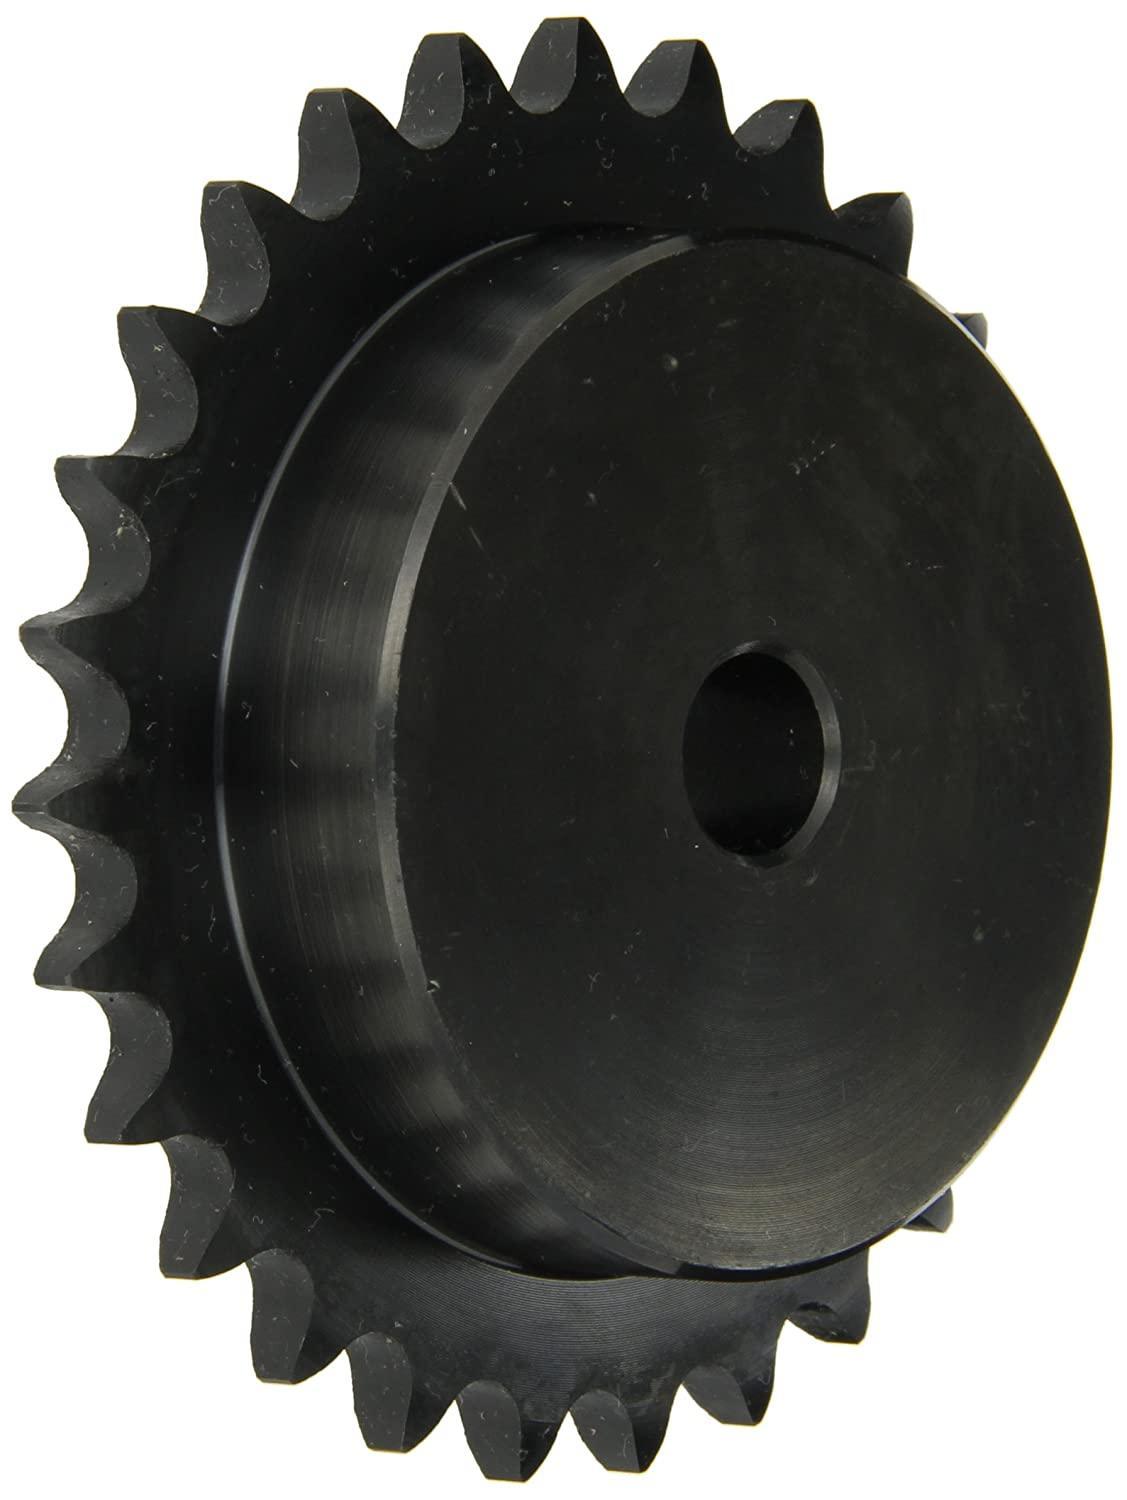 40B40H Roller Chain Sprocket With Stock Bore - Forces Inc